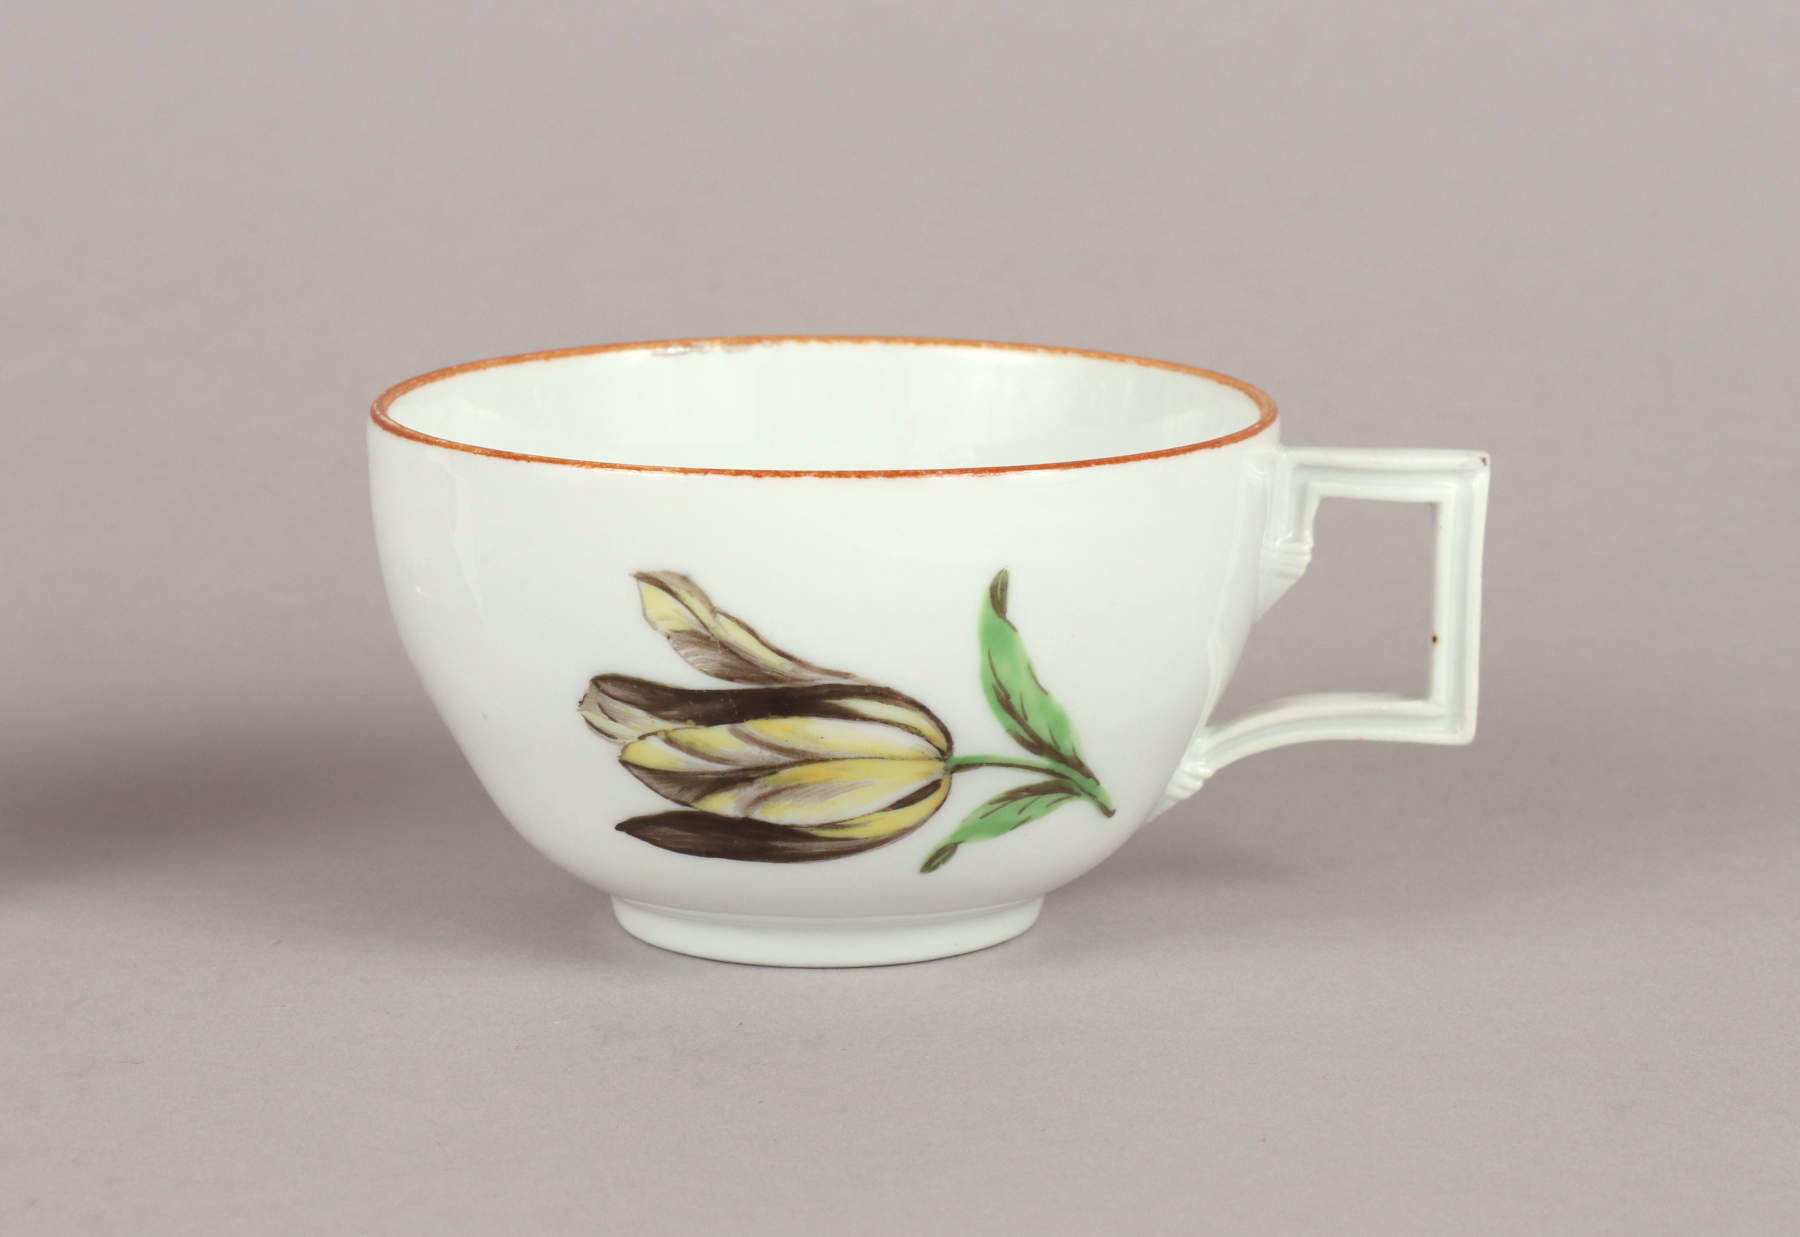 Marcolini Meissen Cup and Saucer, c. 1810